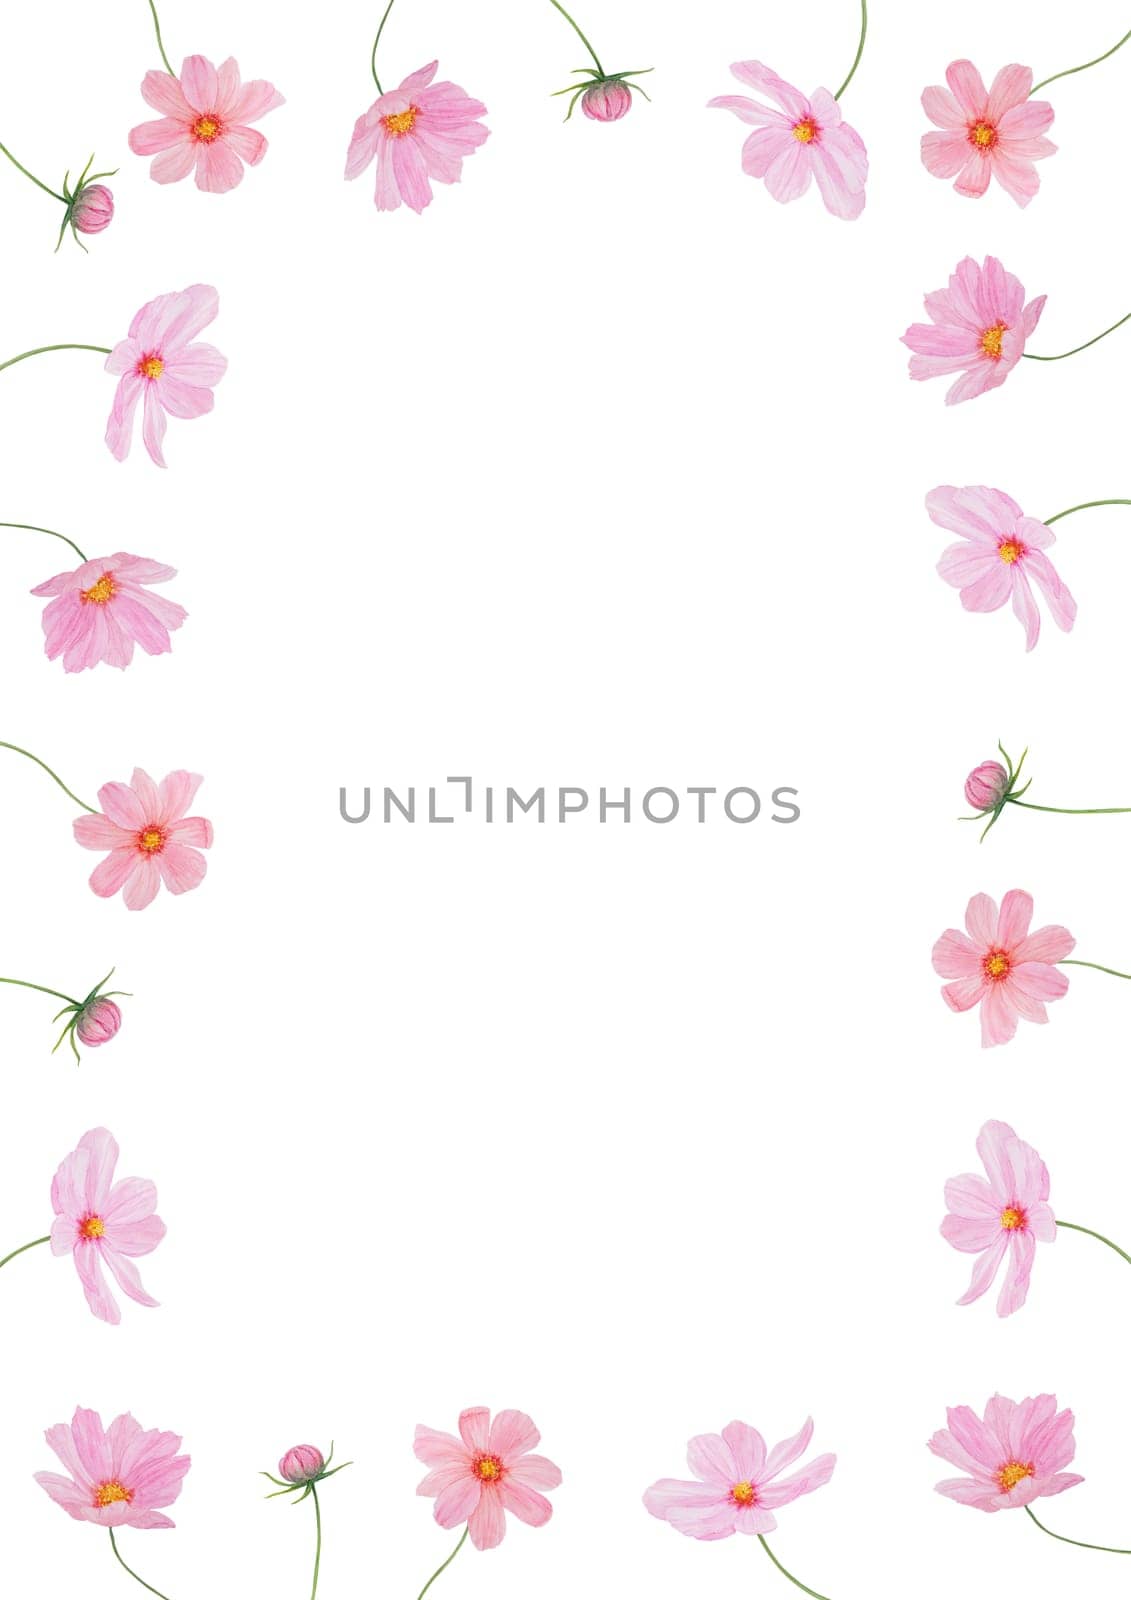 Garden pink Cosmos boquet watercolor illustration. Hand drawn botanical painting, floral sketch. Colorful preety flower clipart for summer or autumn design of wedding invitation, prints, greetings, sublimation, textile